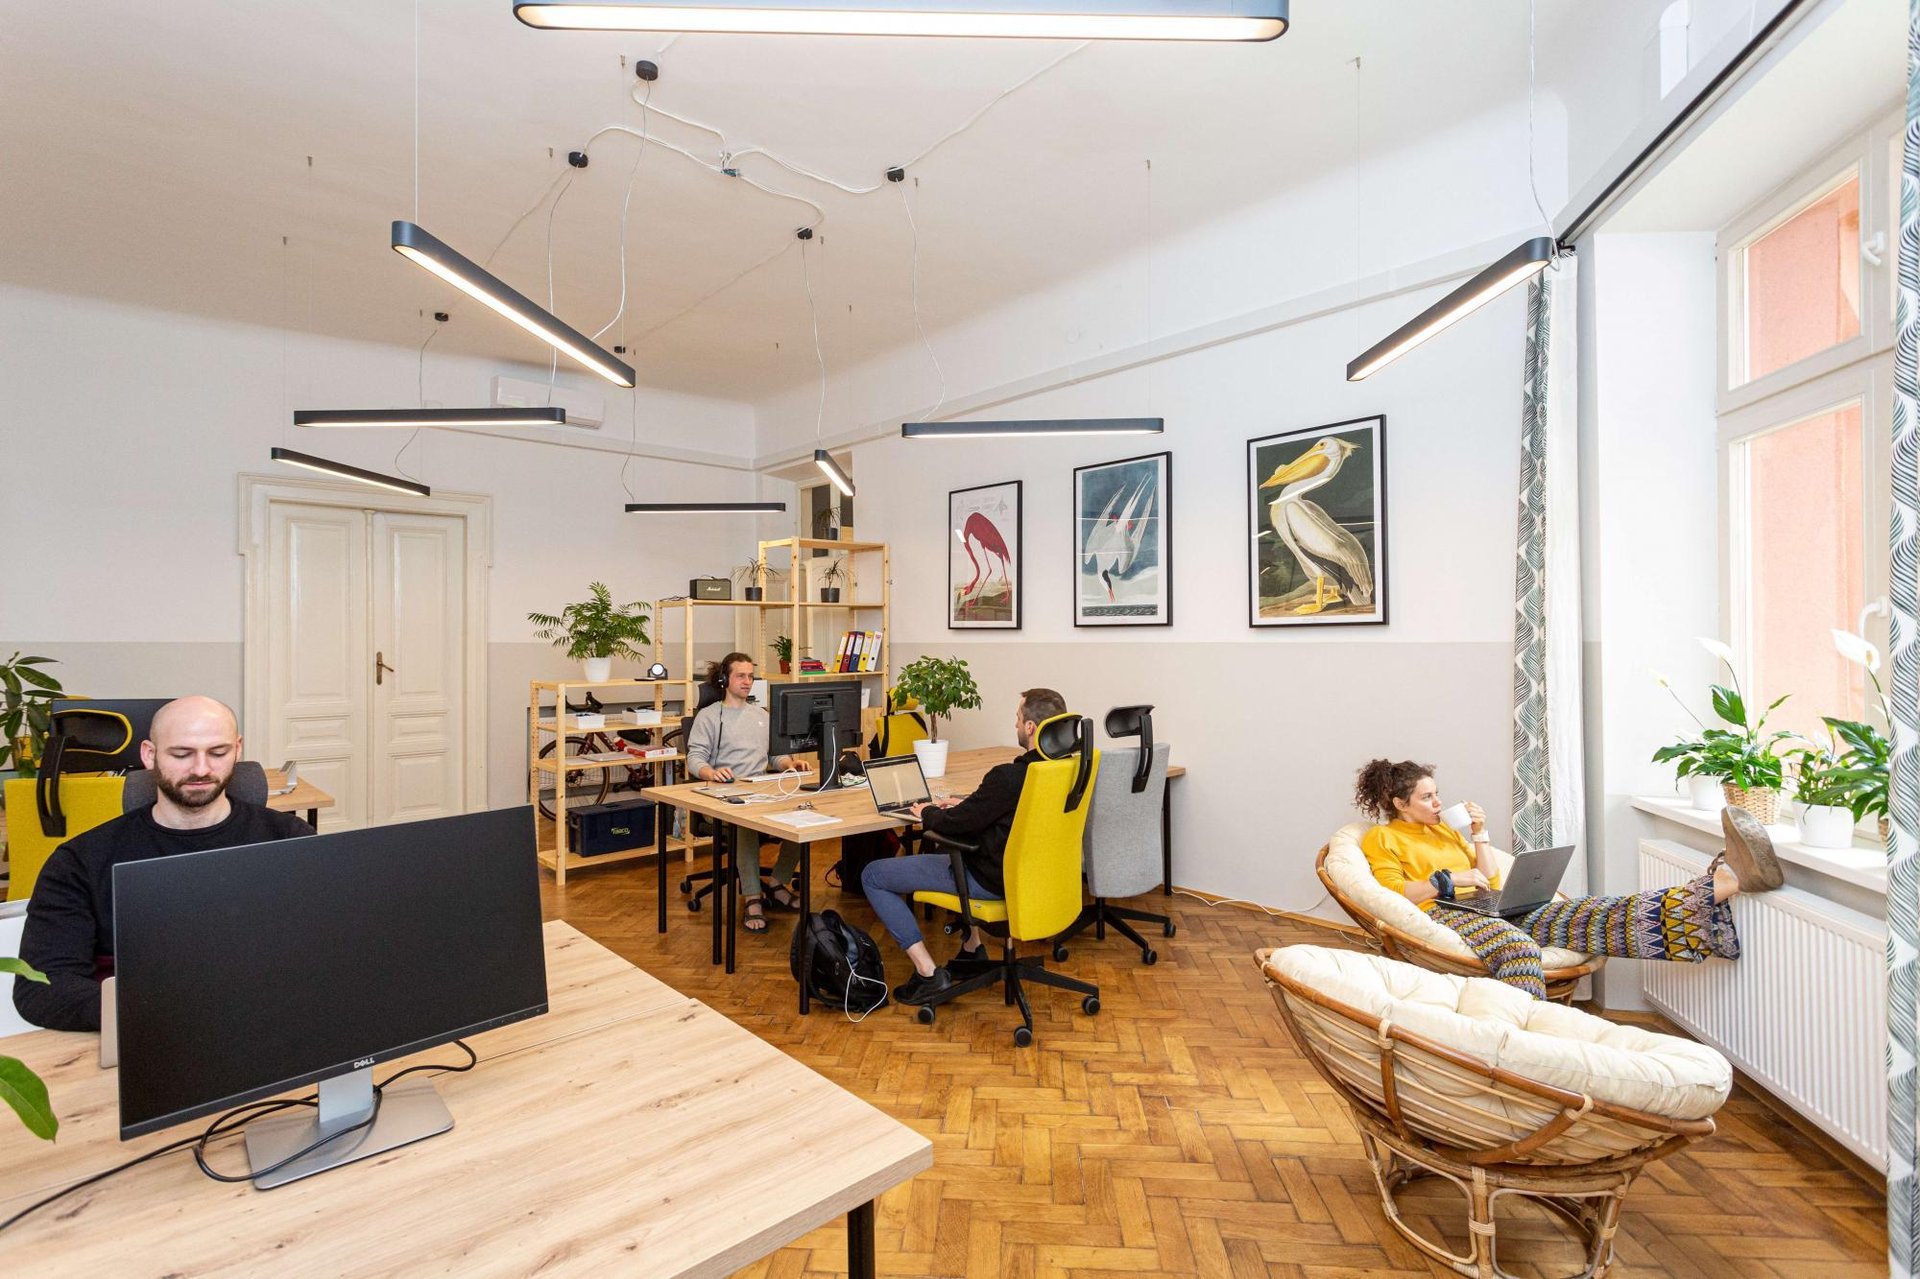 Interior of Kalafiornia Coworking & Offices